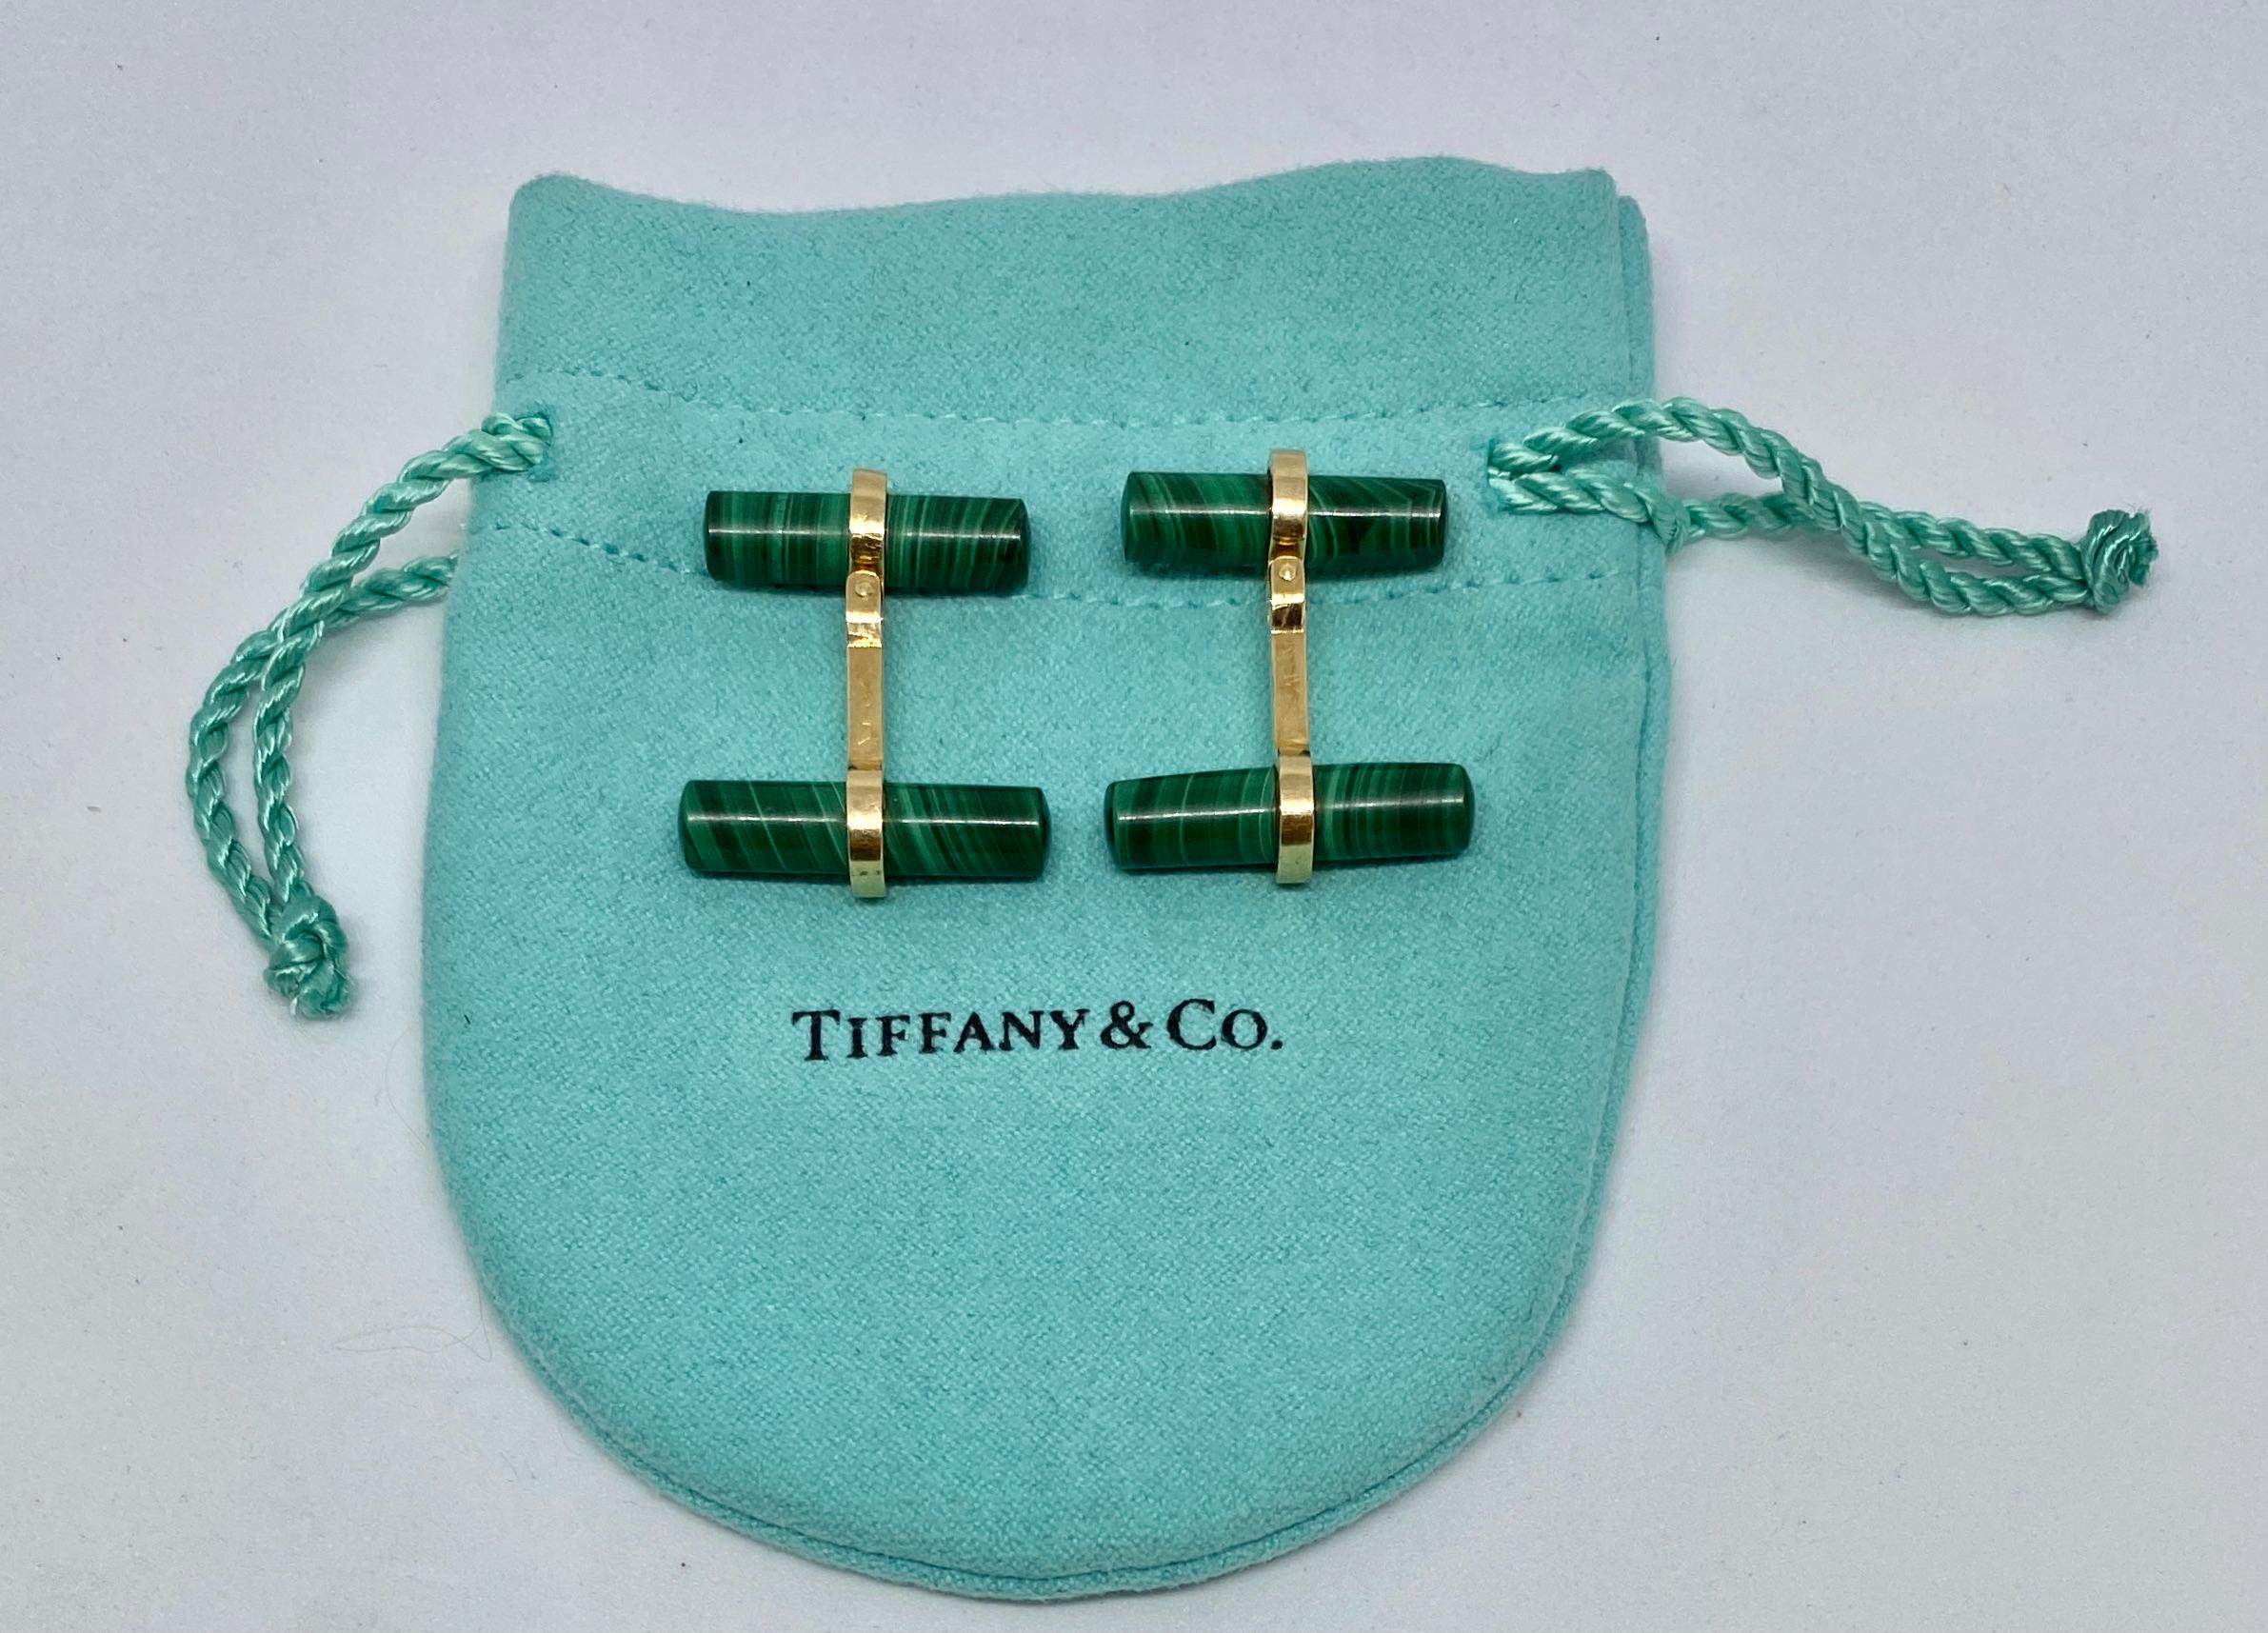 Wonderful and classic cufflinks featuring four malachite batons set in 14K yellow gold and signed Tiffany & Co.

This is among the most sought-after cufflink designs: tasteful, versatile and distinctive. Made in the Tiffany workrooms, the